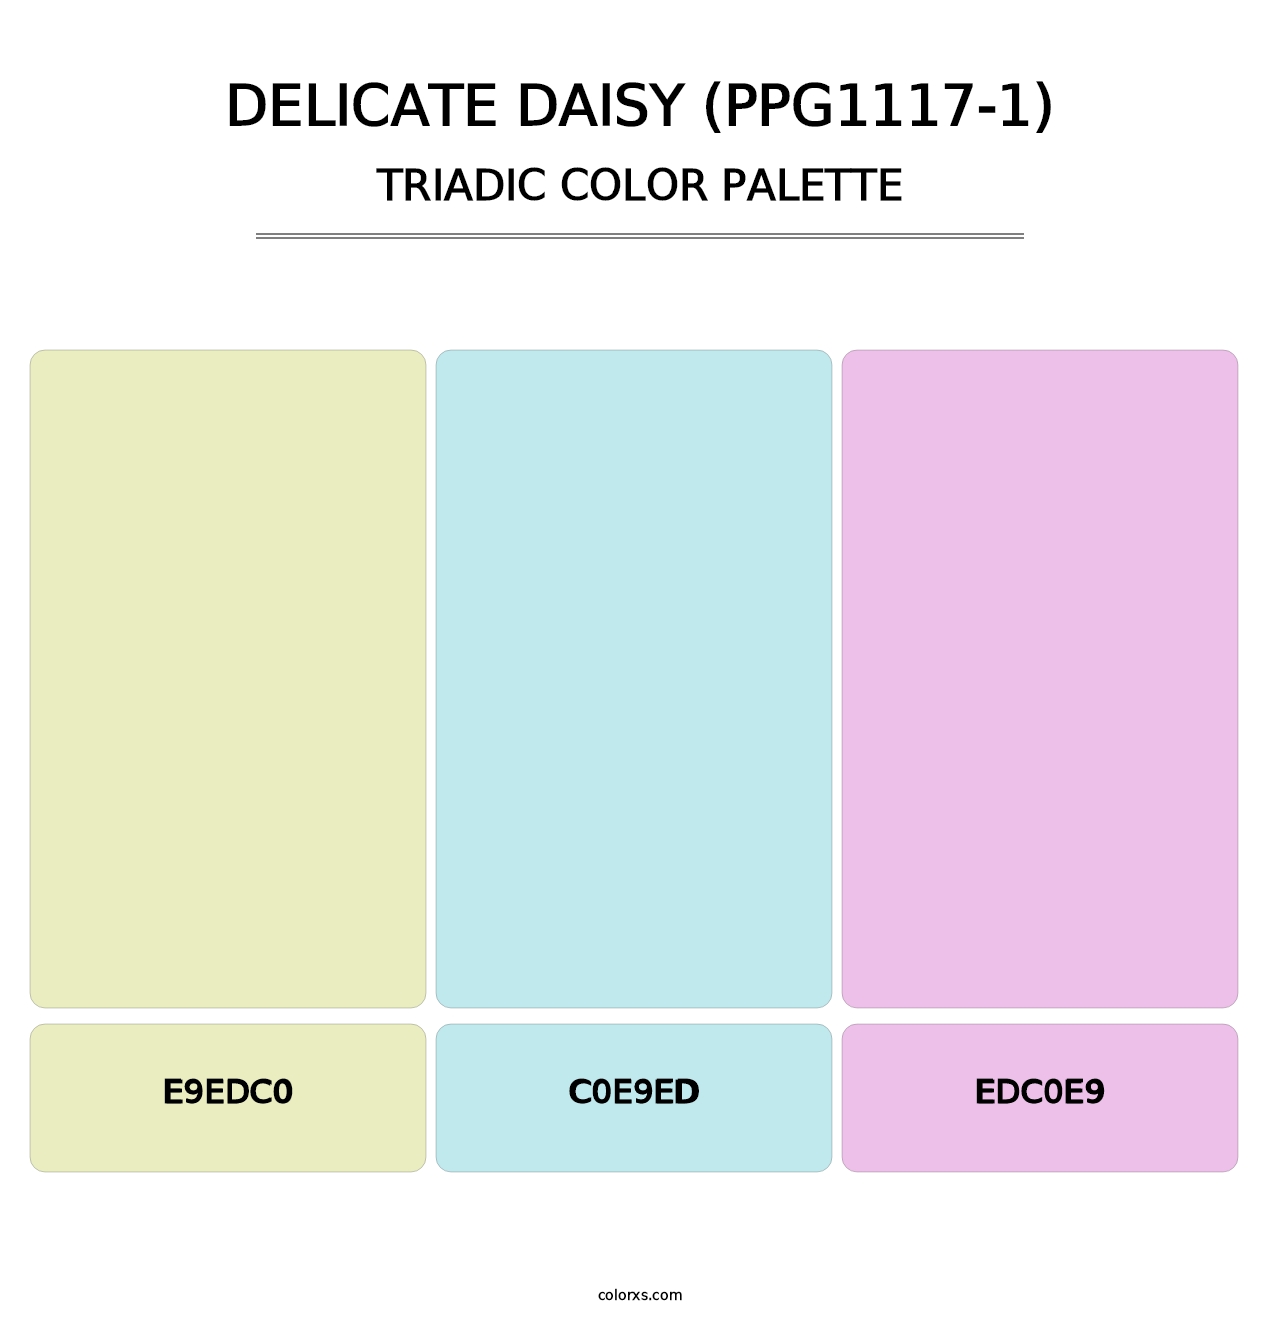 Delicate Daisy (PPG1117-1) - Triadic Color Palette